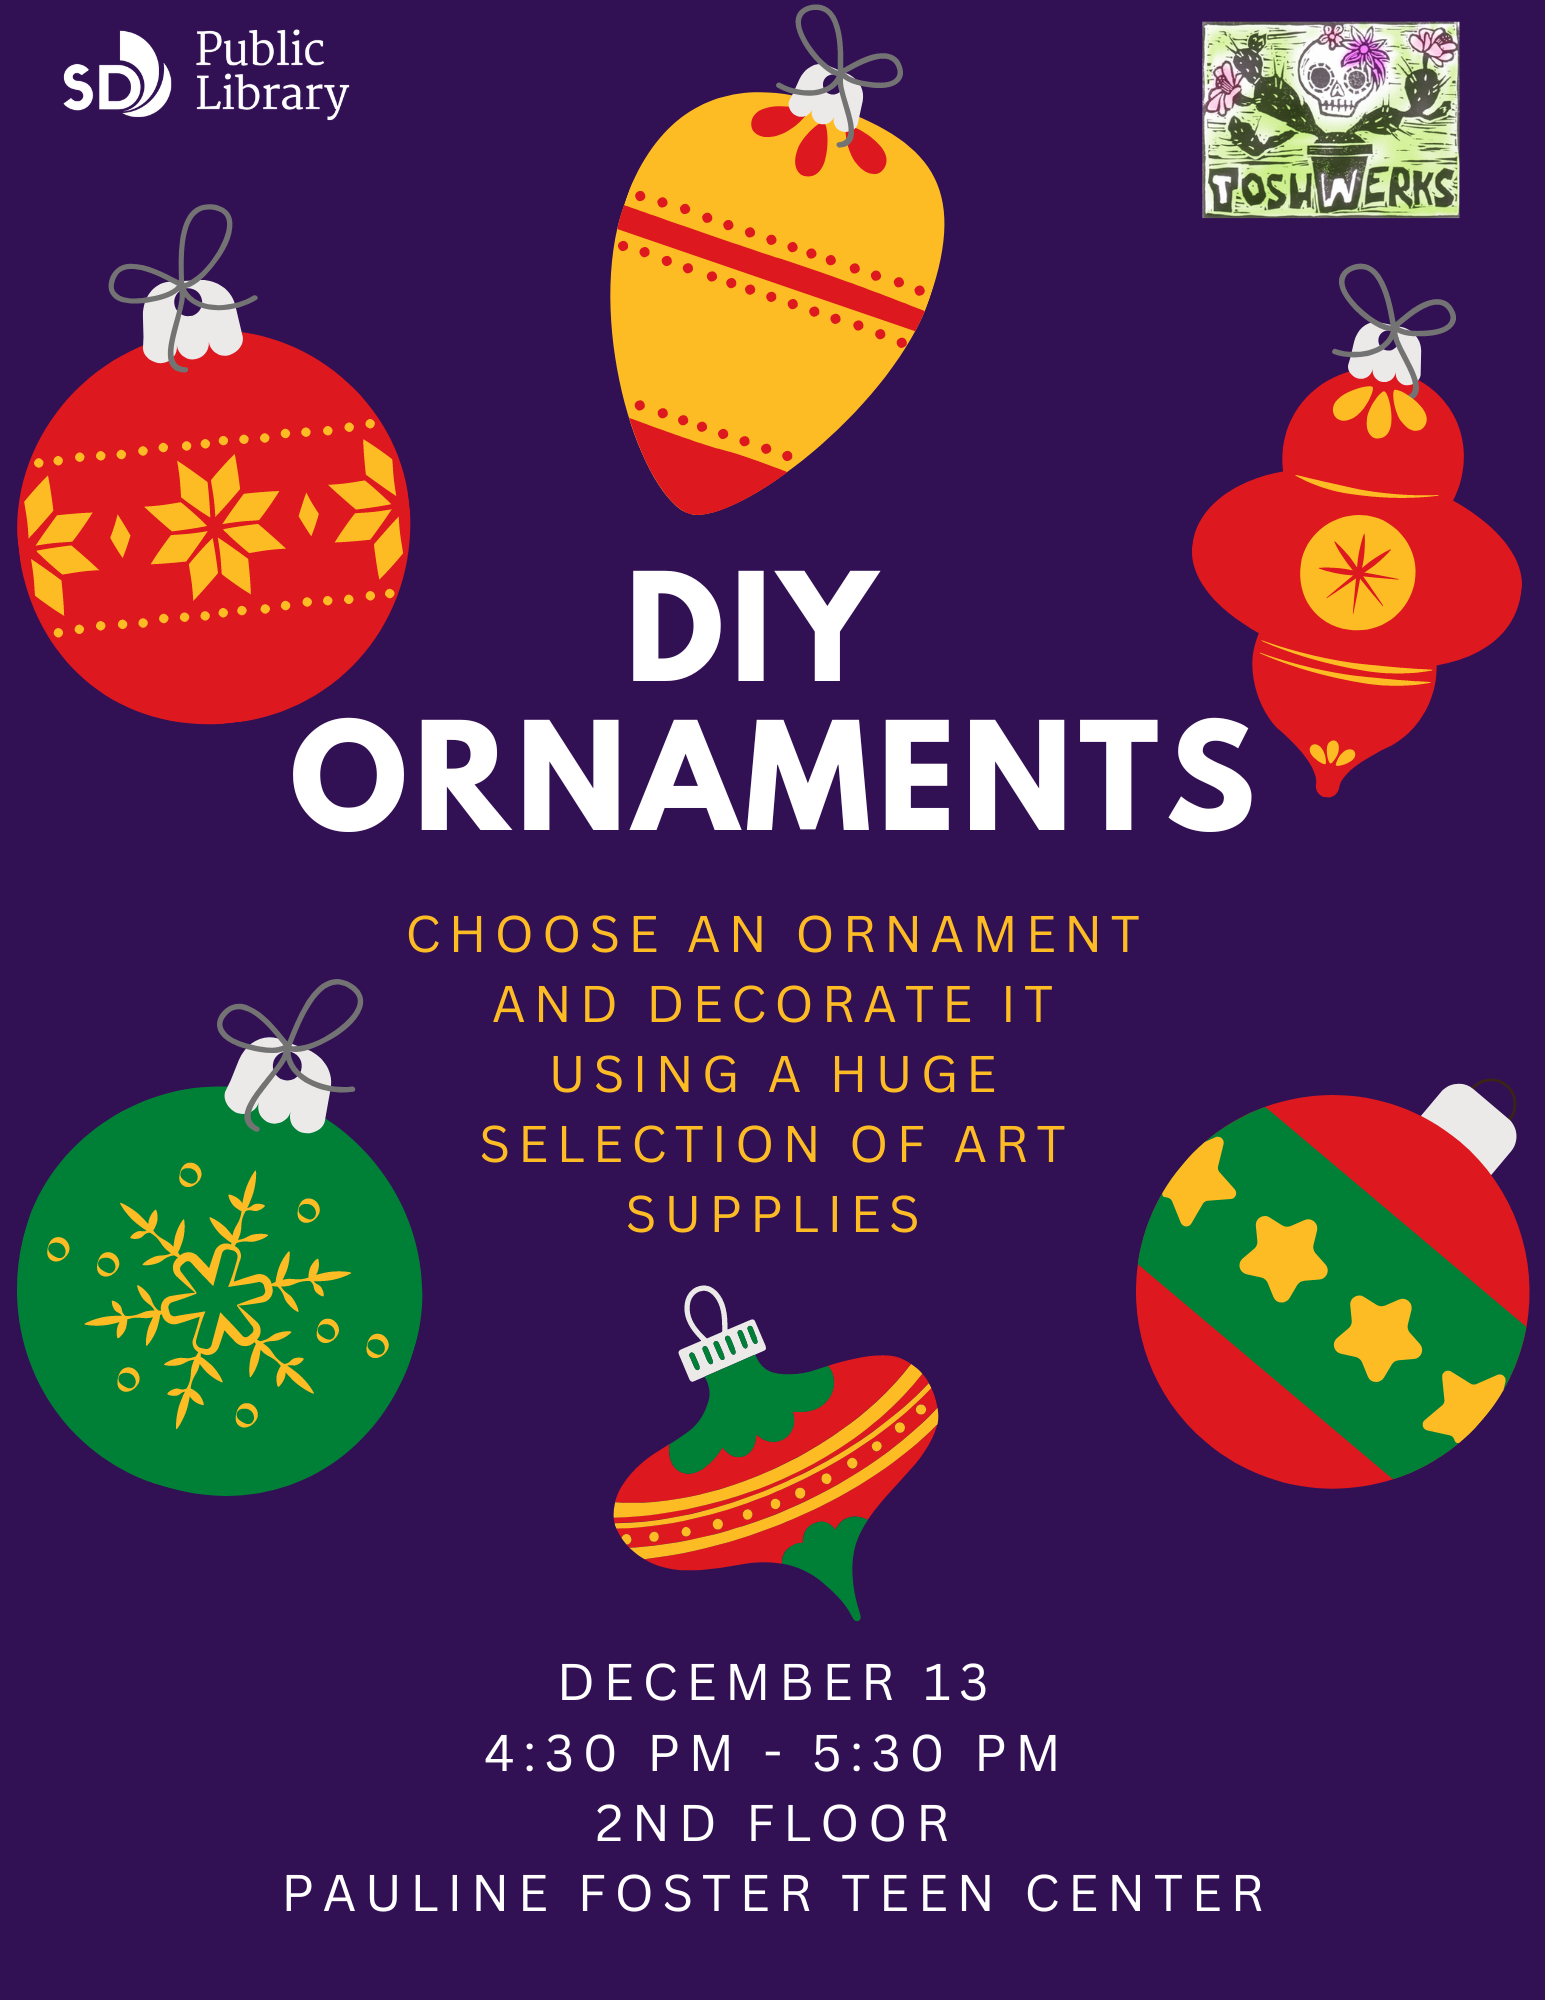 DIY Ornaments. Choose and ornament and decorate it using a huge selection of art supplies. December 13, 4:30 pm to 5:30 pm. 2nd floor, Pauline Foster Teen Center. 